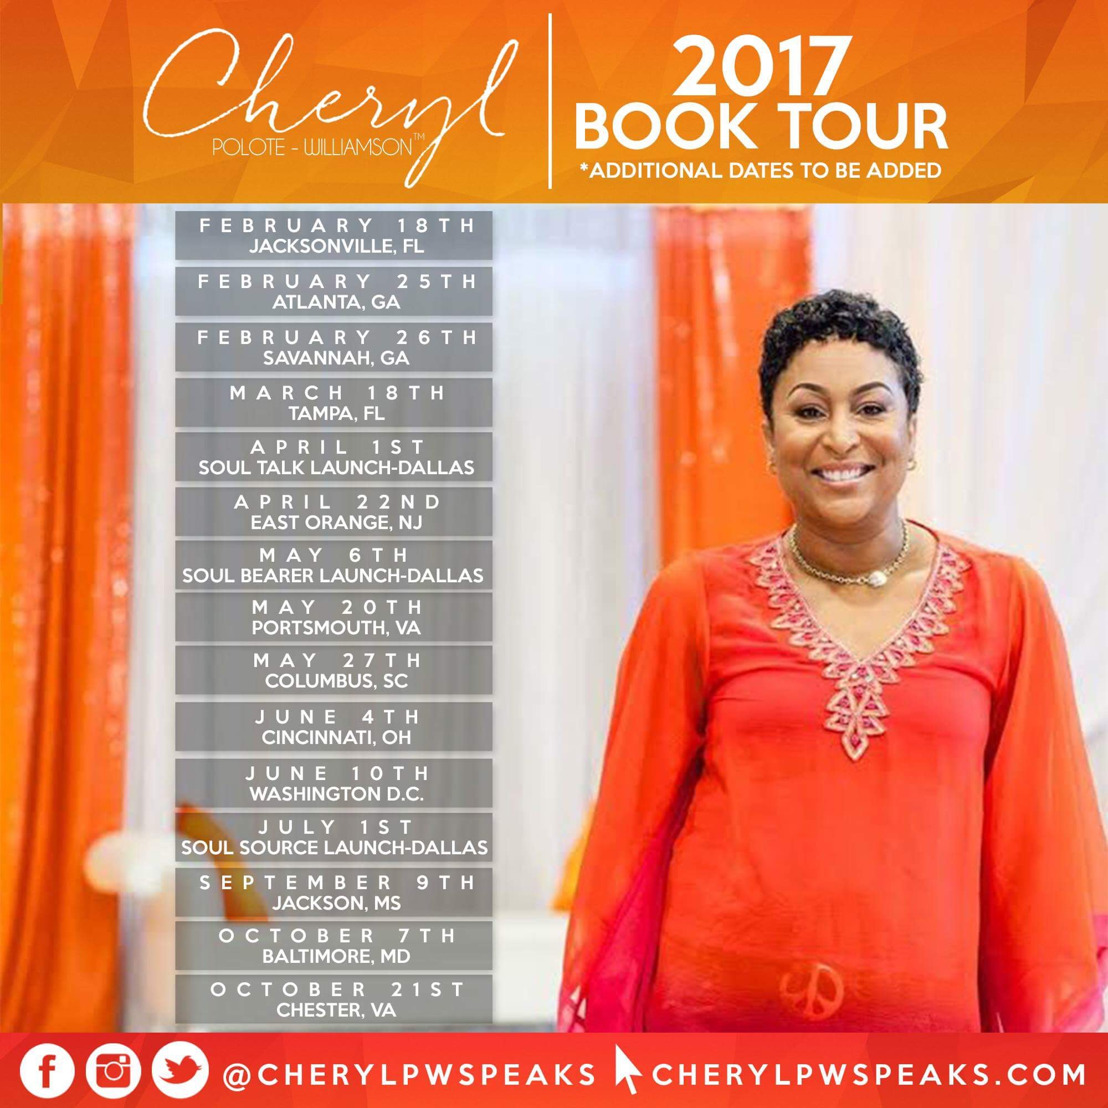 4 Time Best Selling Author Cheryl Polote-Williamson Announces Affirmed Book Tour with a hometown visit to Savannah, GA.